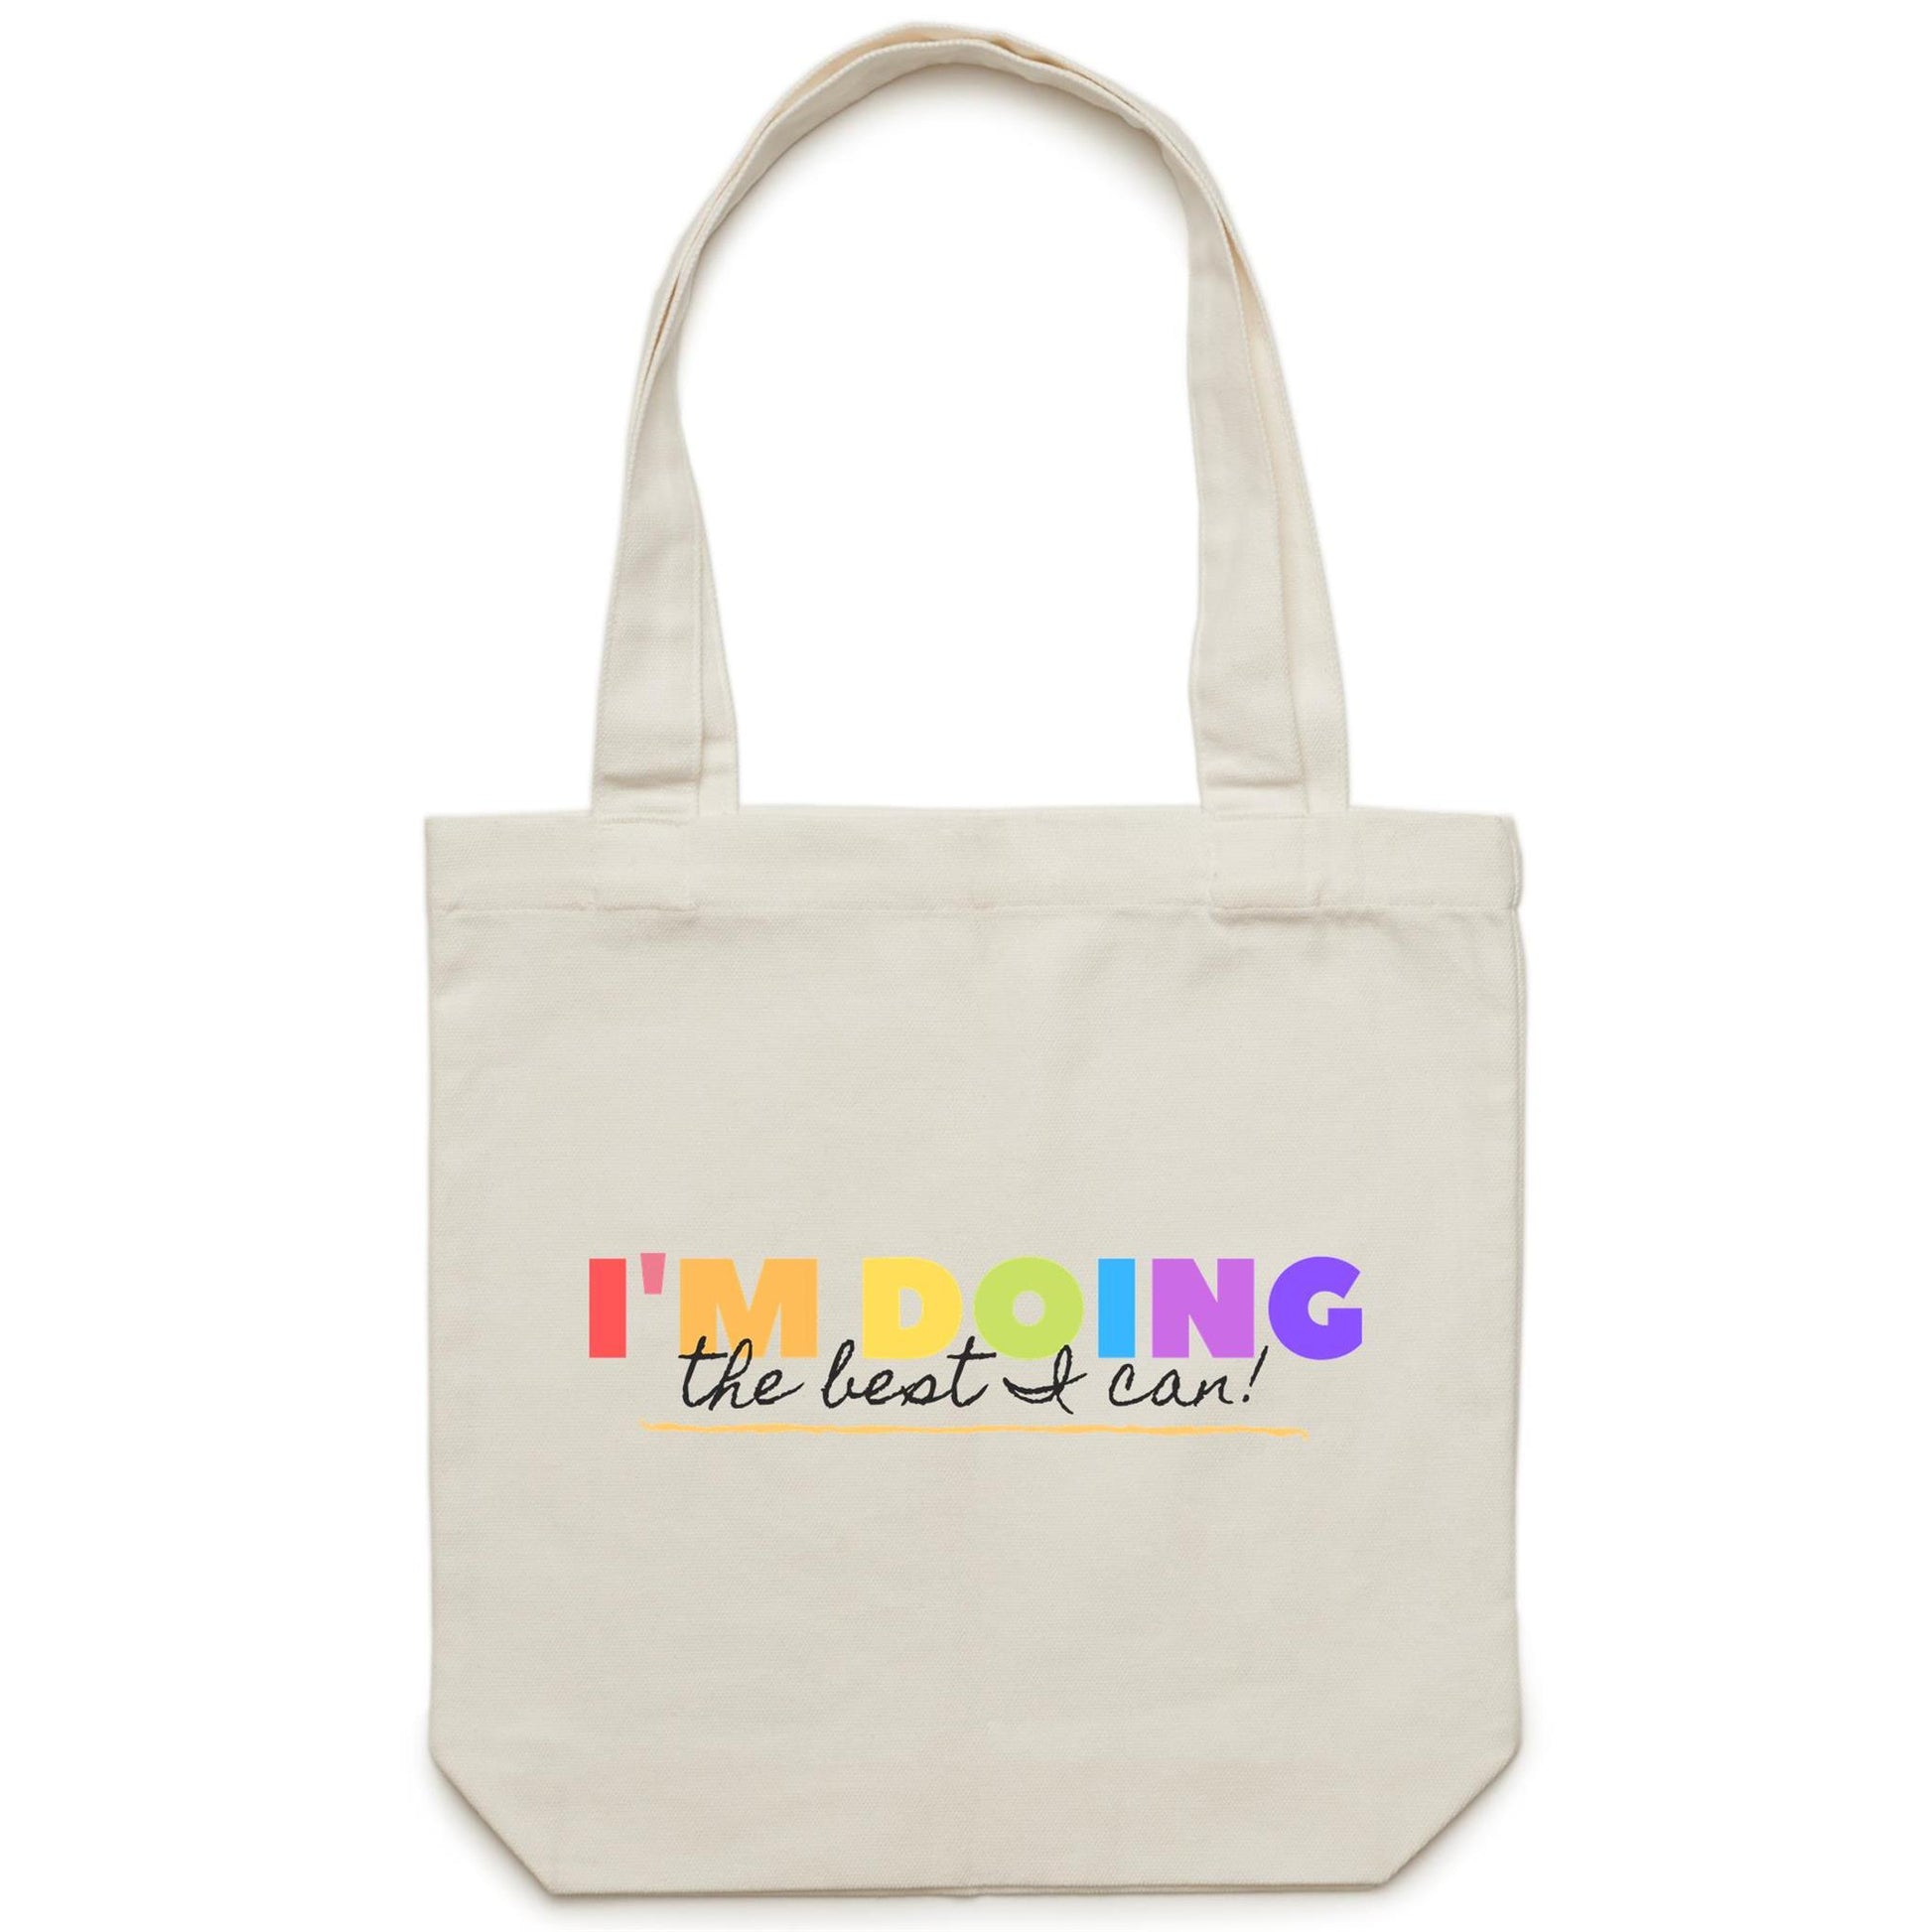 I'm Doing The Best I Can - Canvas Tote Bag Cream One Size Tote Bag Motivation